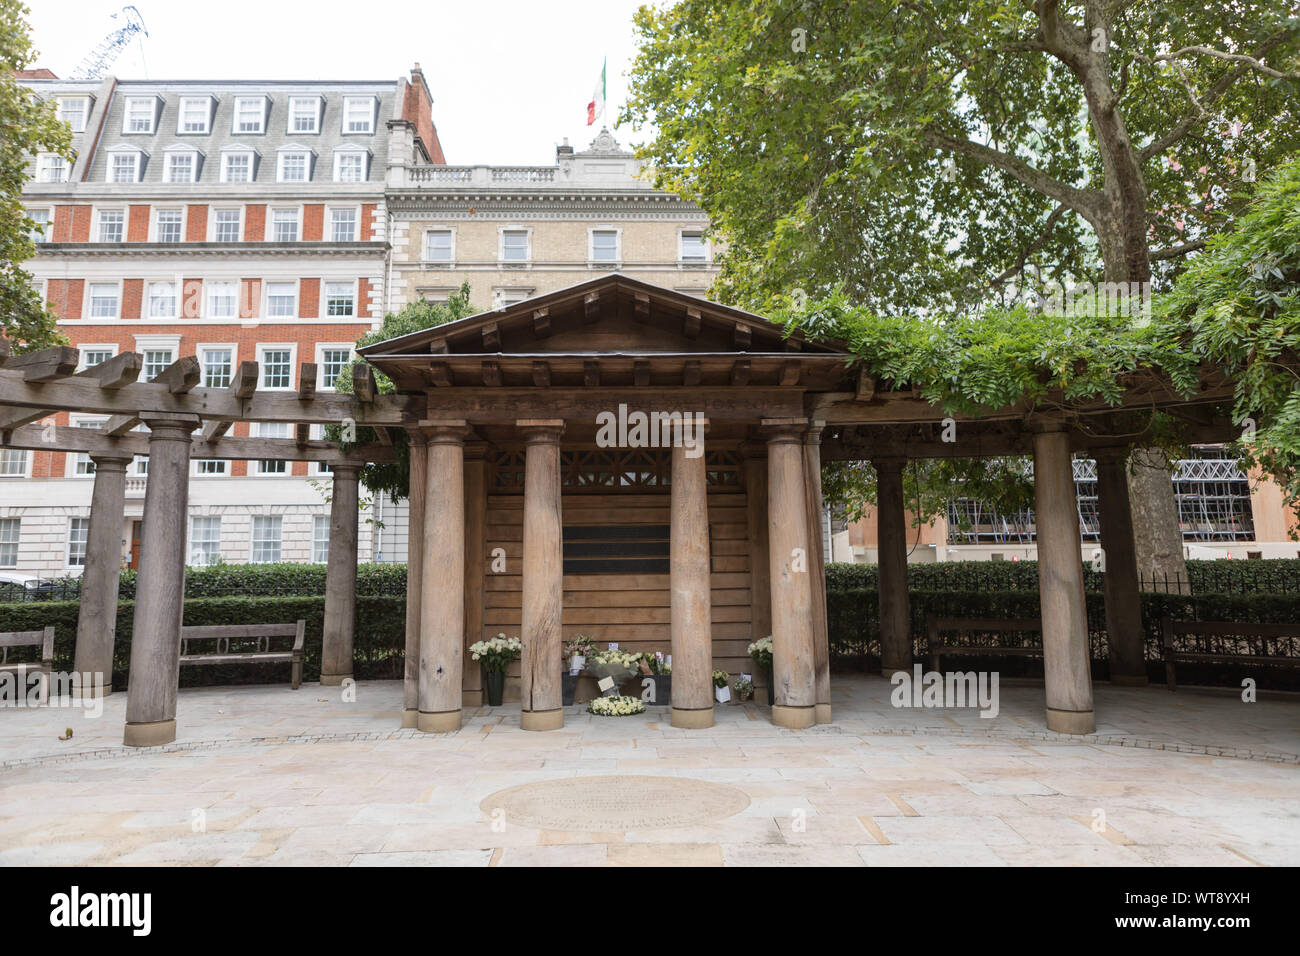 Grosvenor Square, London, UK. 9th Sep, 2019. People pay their respect at the memorial in the Square which was dedicated to 67 British victims of the 11 September 2001 terrorist attacks. Credit: Penelope Barritt/Alamy Live News Stock Photo